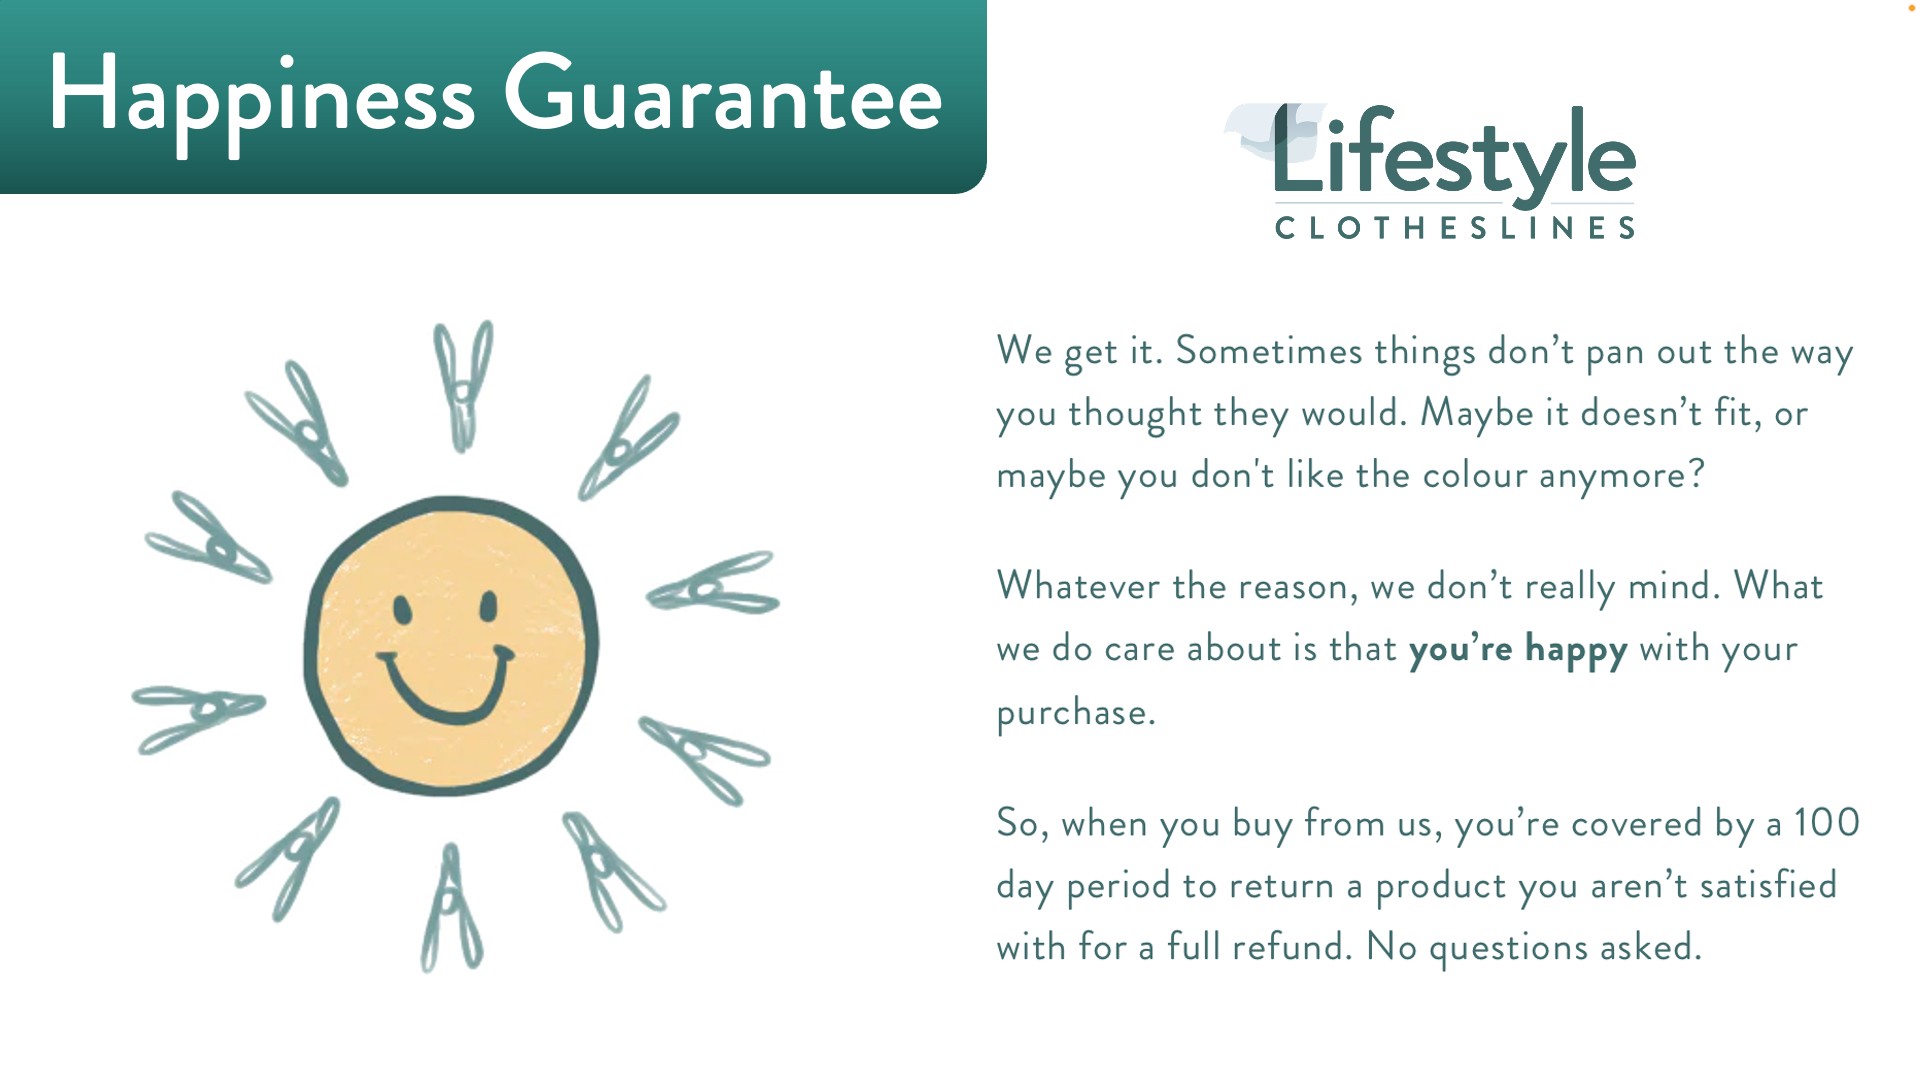 1.4m clothesline purchase 100 day happiness guarantee